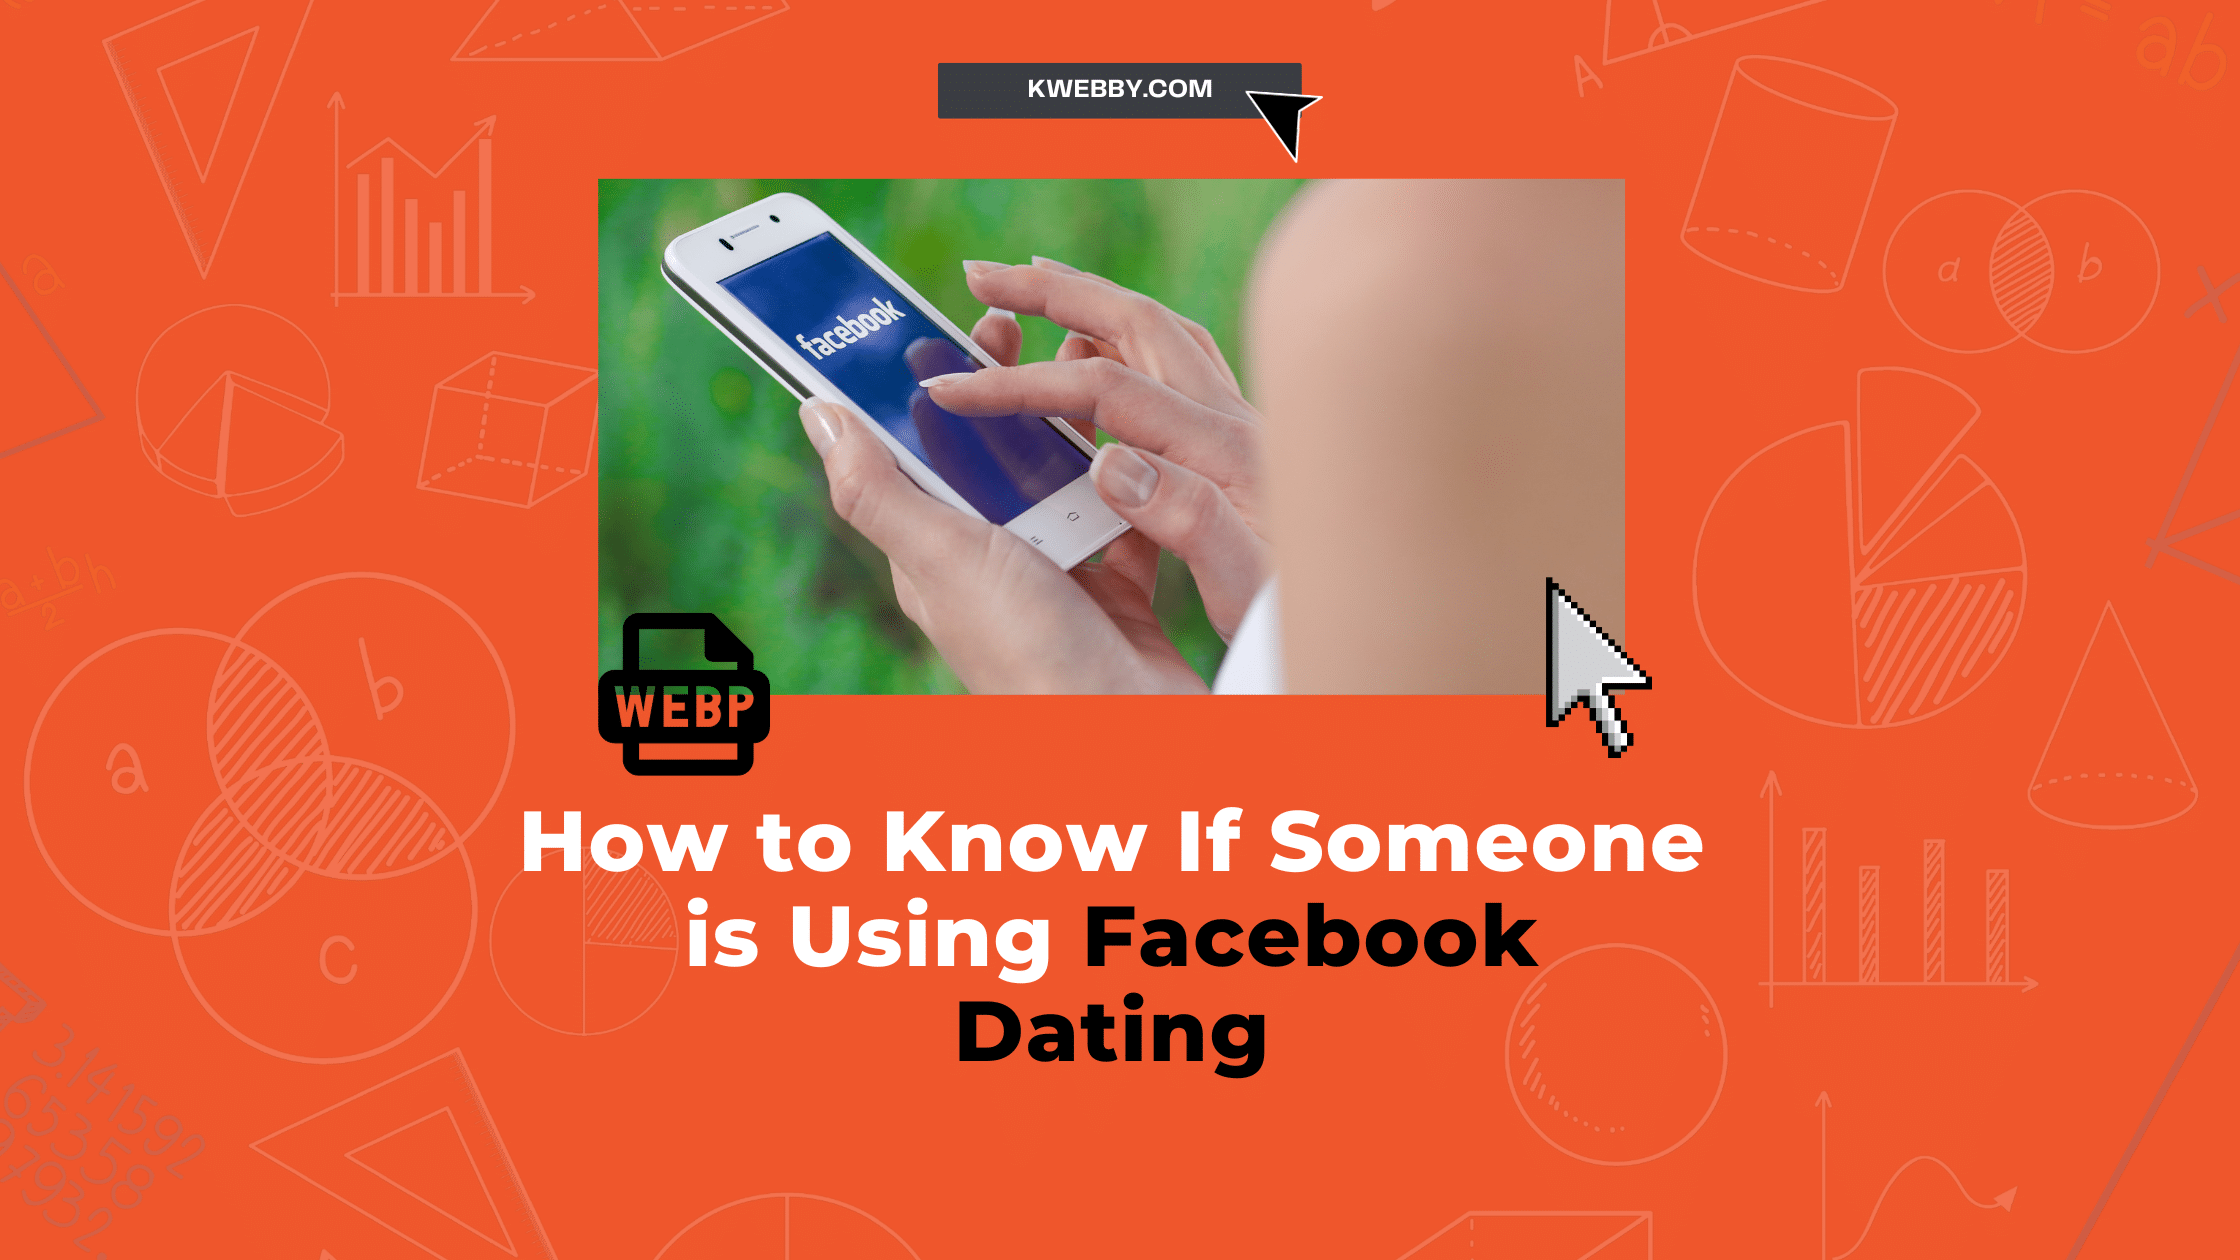 How to Know If Someone is Using Facebook Dating (4 Methods)